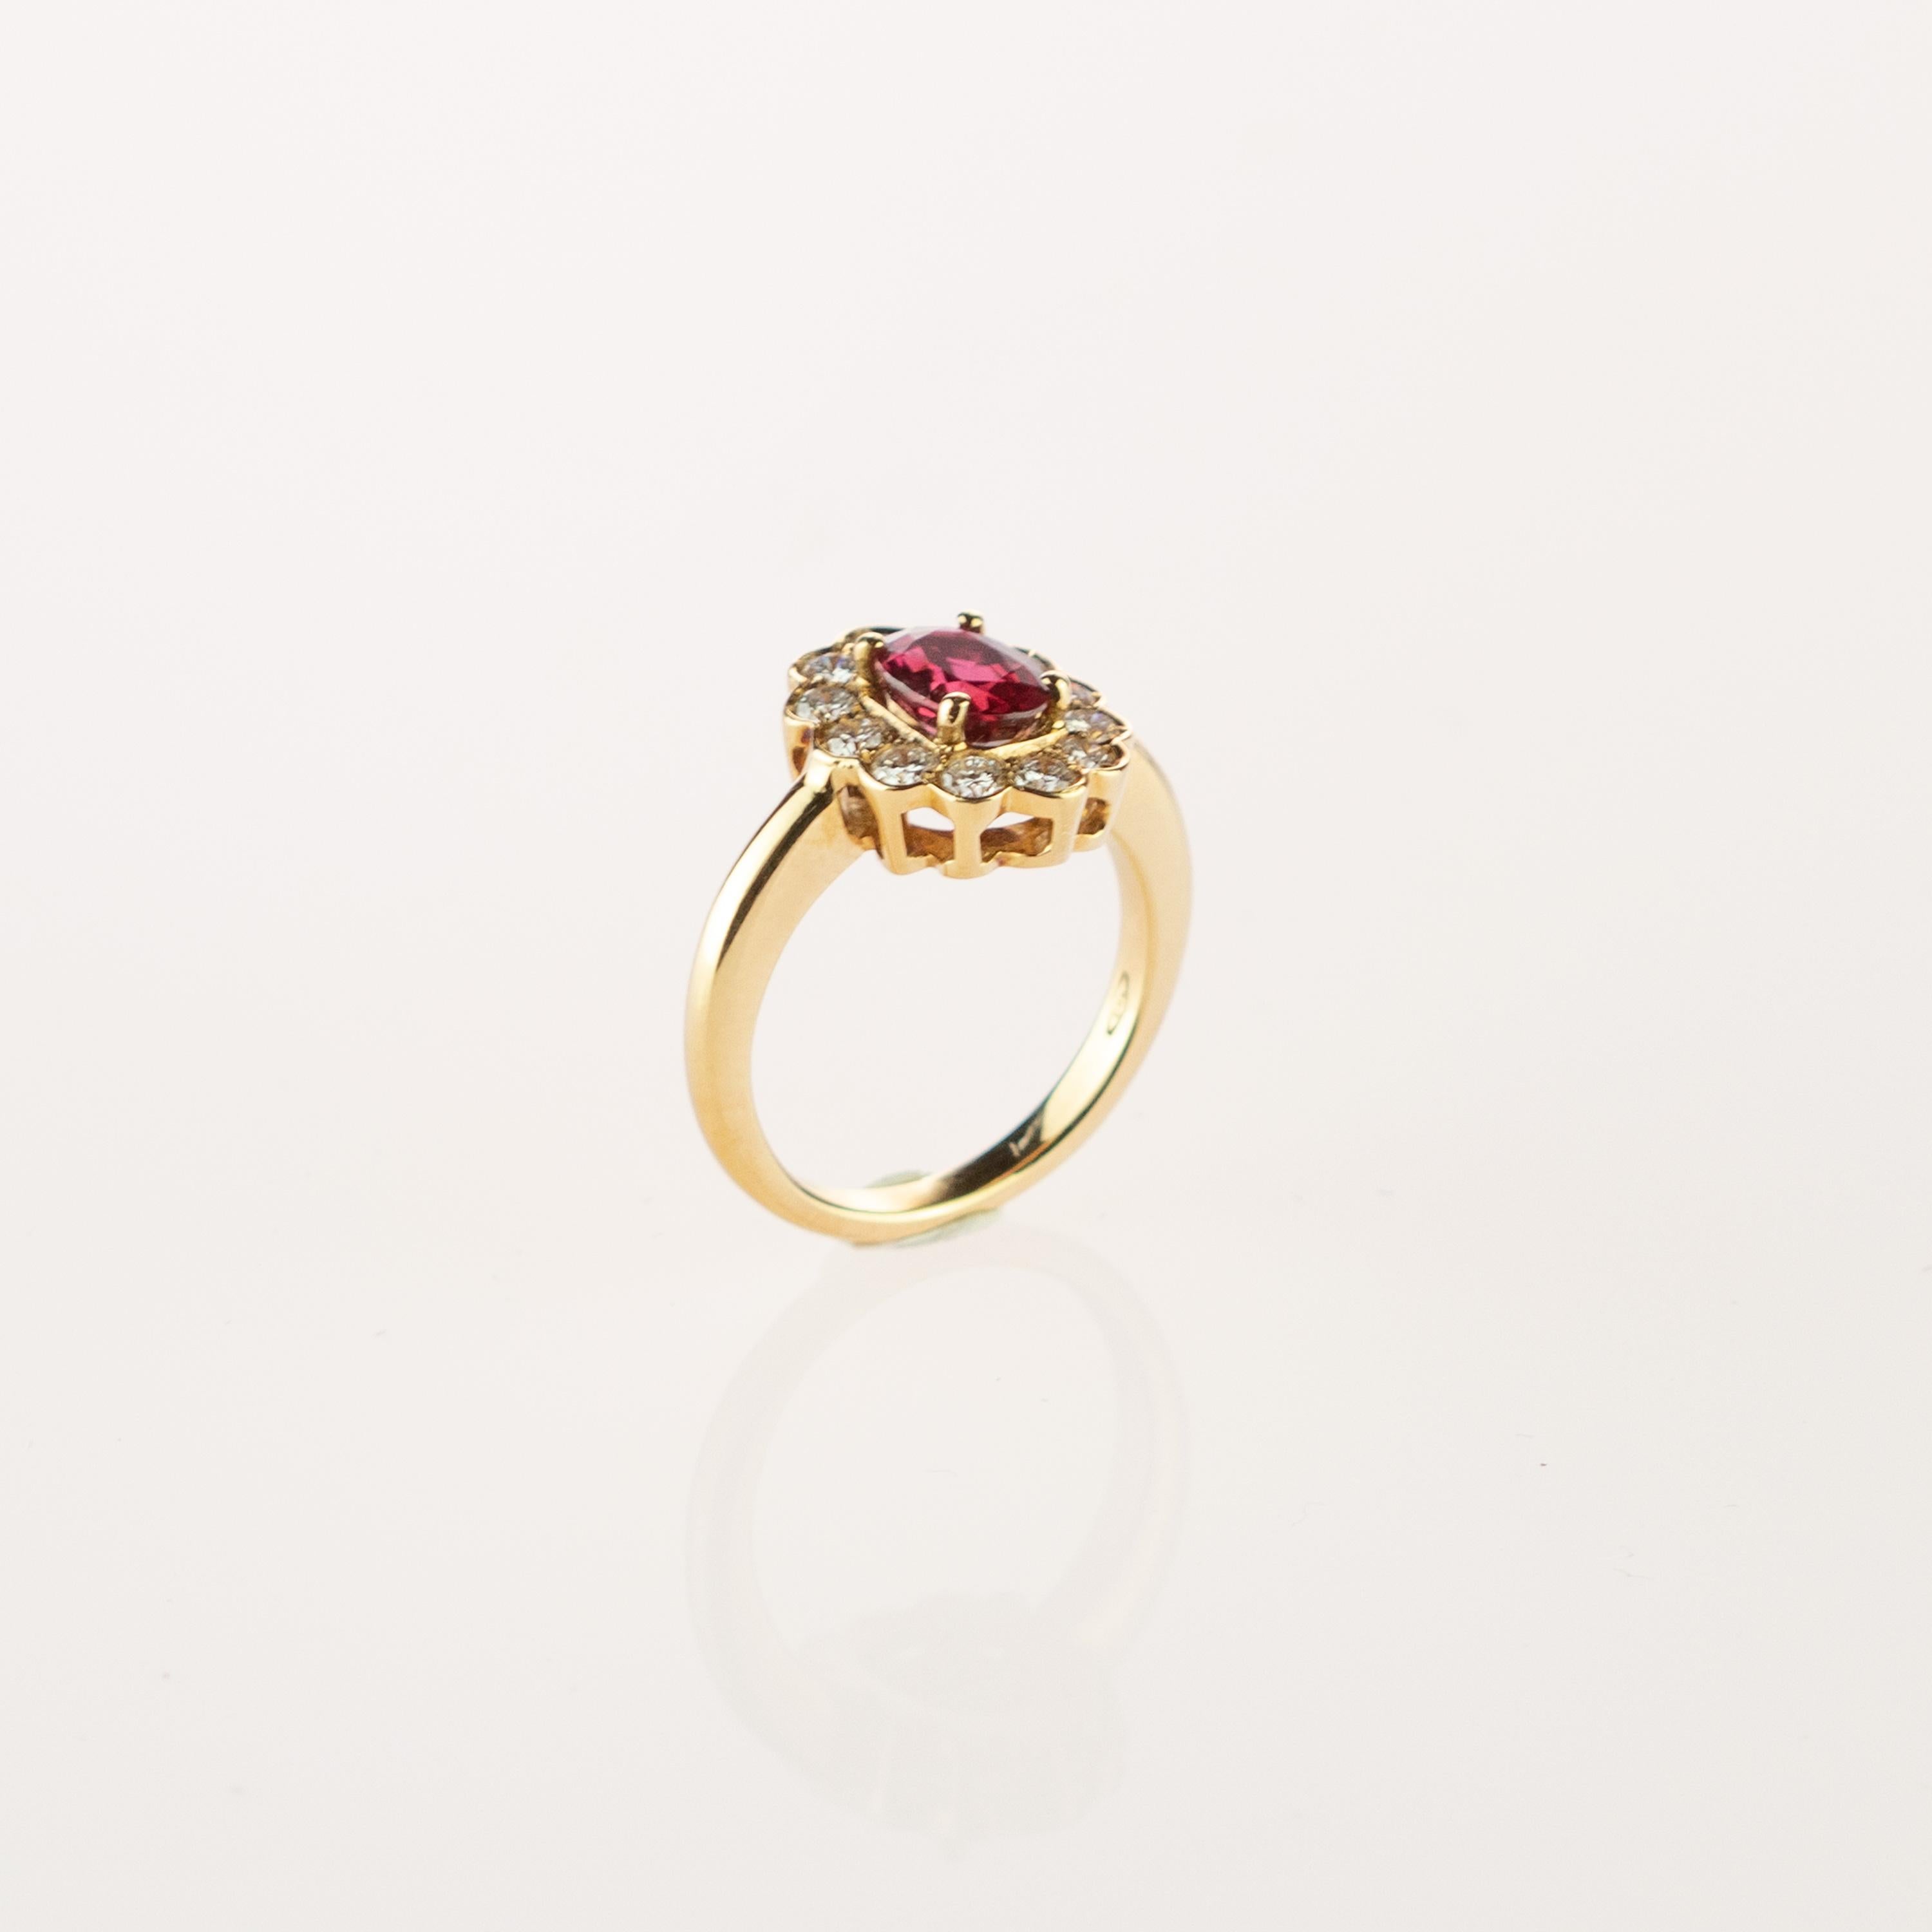 Iconic and modern gold ring with an oval ruby (1.30 carat) with 12 round brilliant diamonds surrounding and forming a flower shape. The delicate 18 karat gold threads complement the fine stones creating a subtle and delicate woven. A magnificent